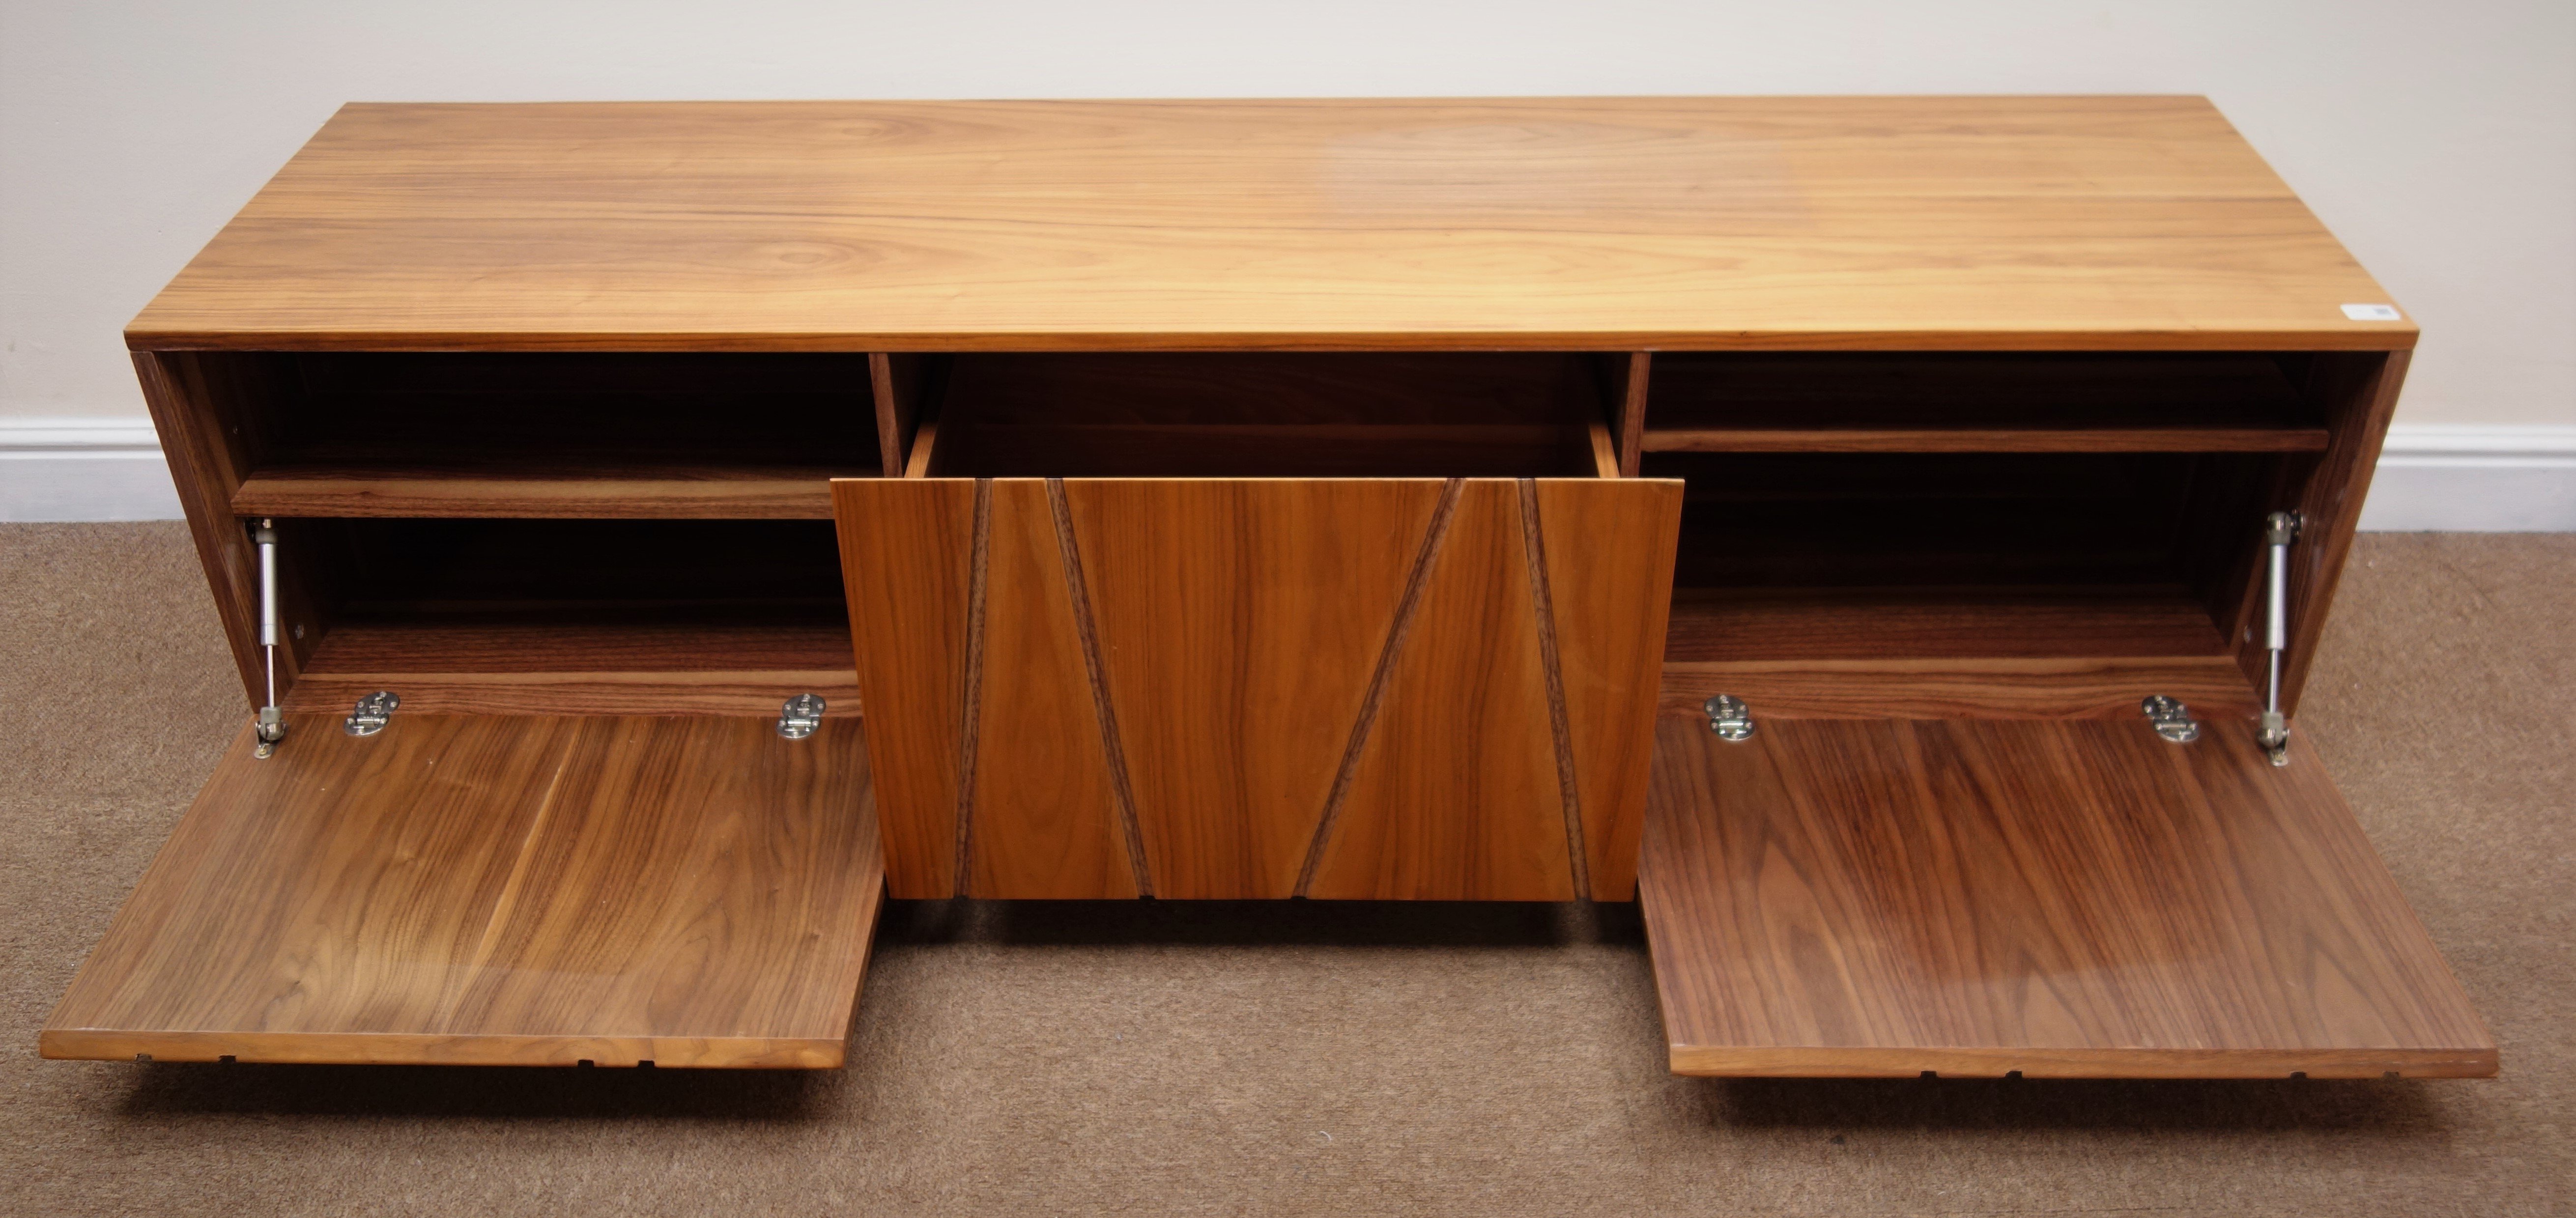 Dwell Furniture walnut low console unit, two fall front units flanking single central drawer, - Image 3 of 3